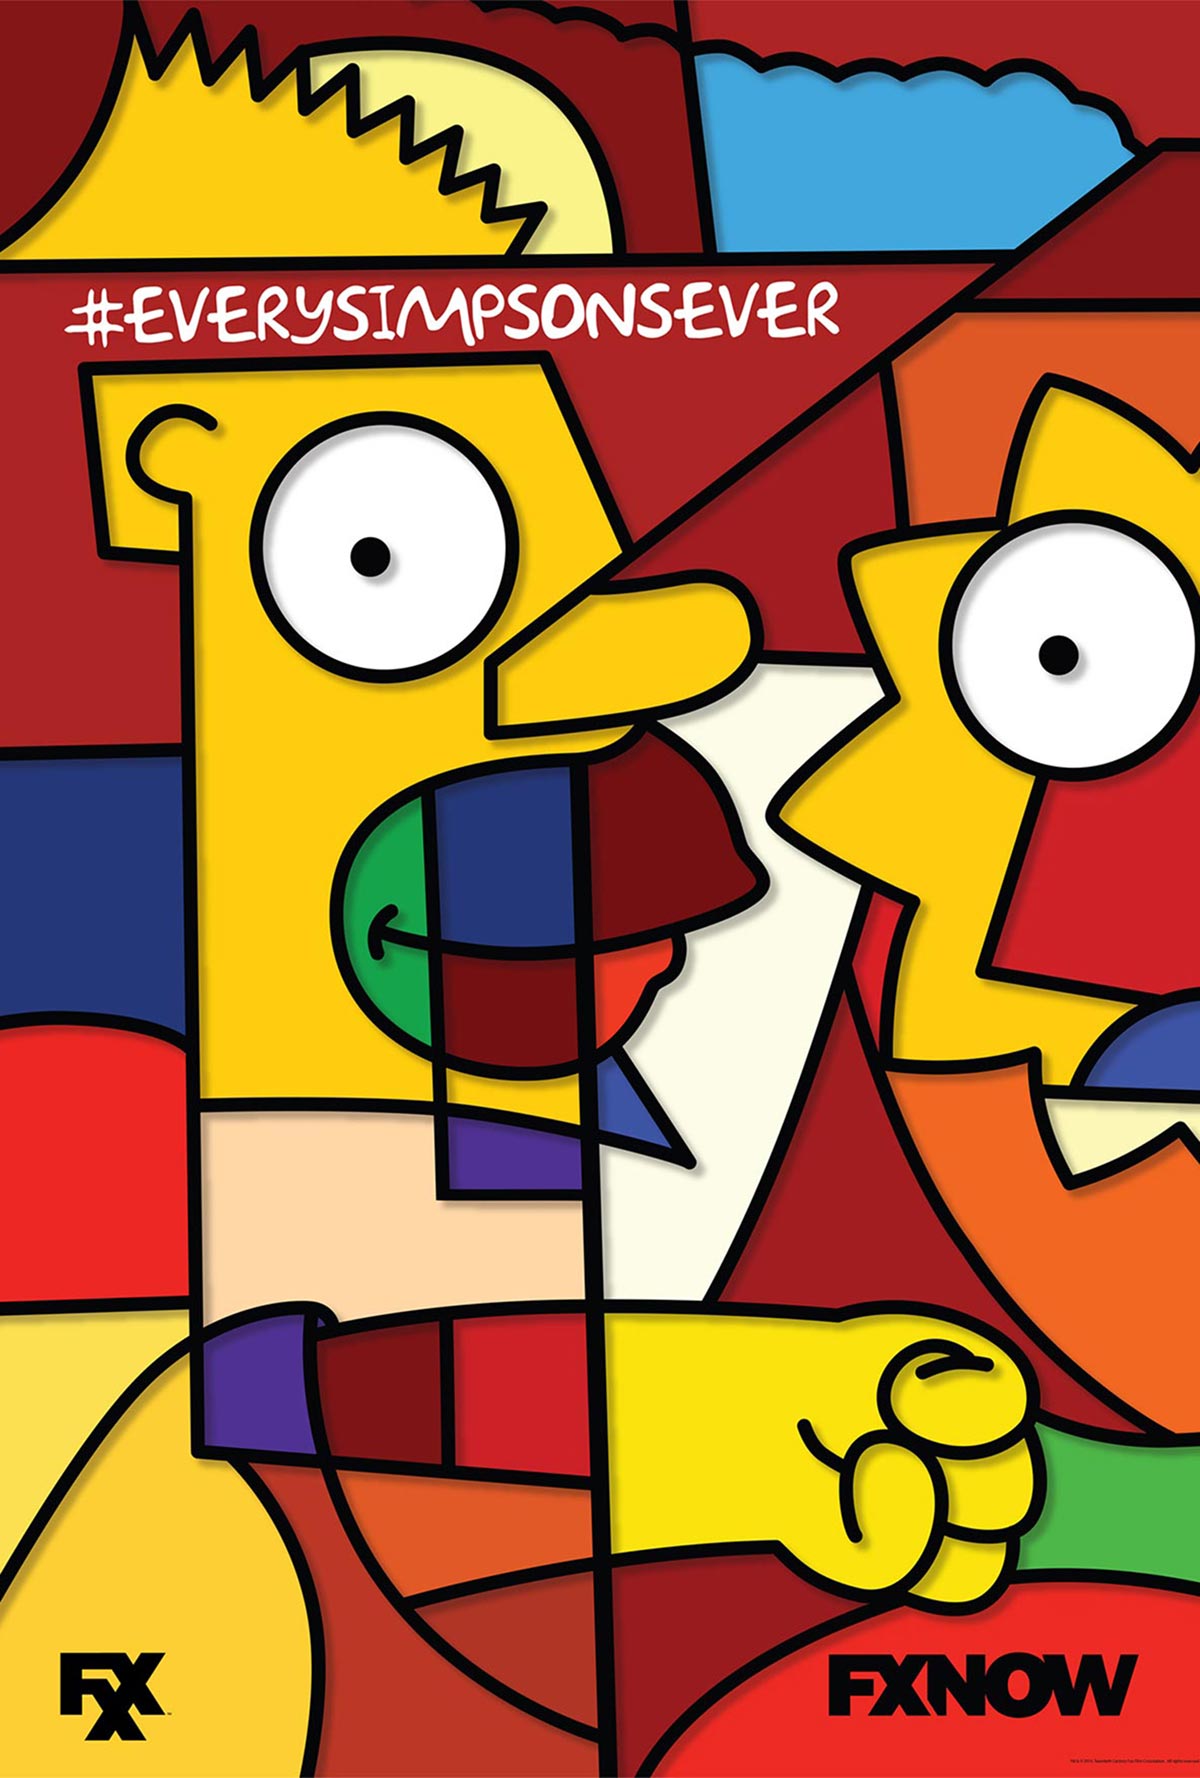 035_dreamogram-iconisus-key-art-movie-poster-the-simpsons-3_vertical-cover